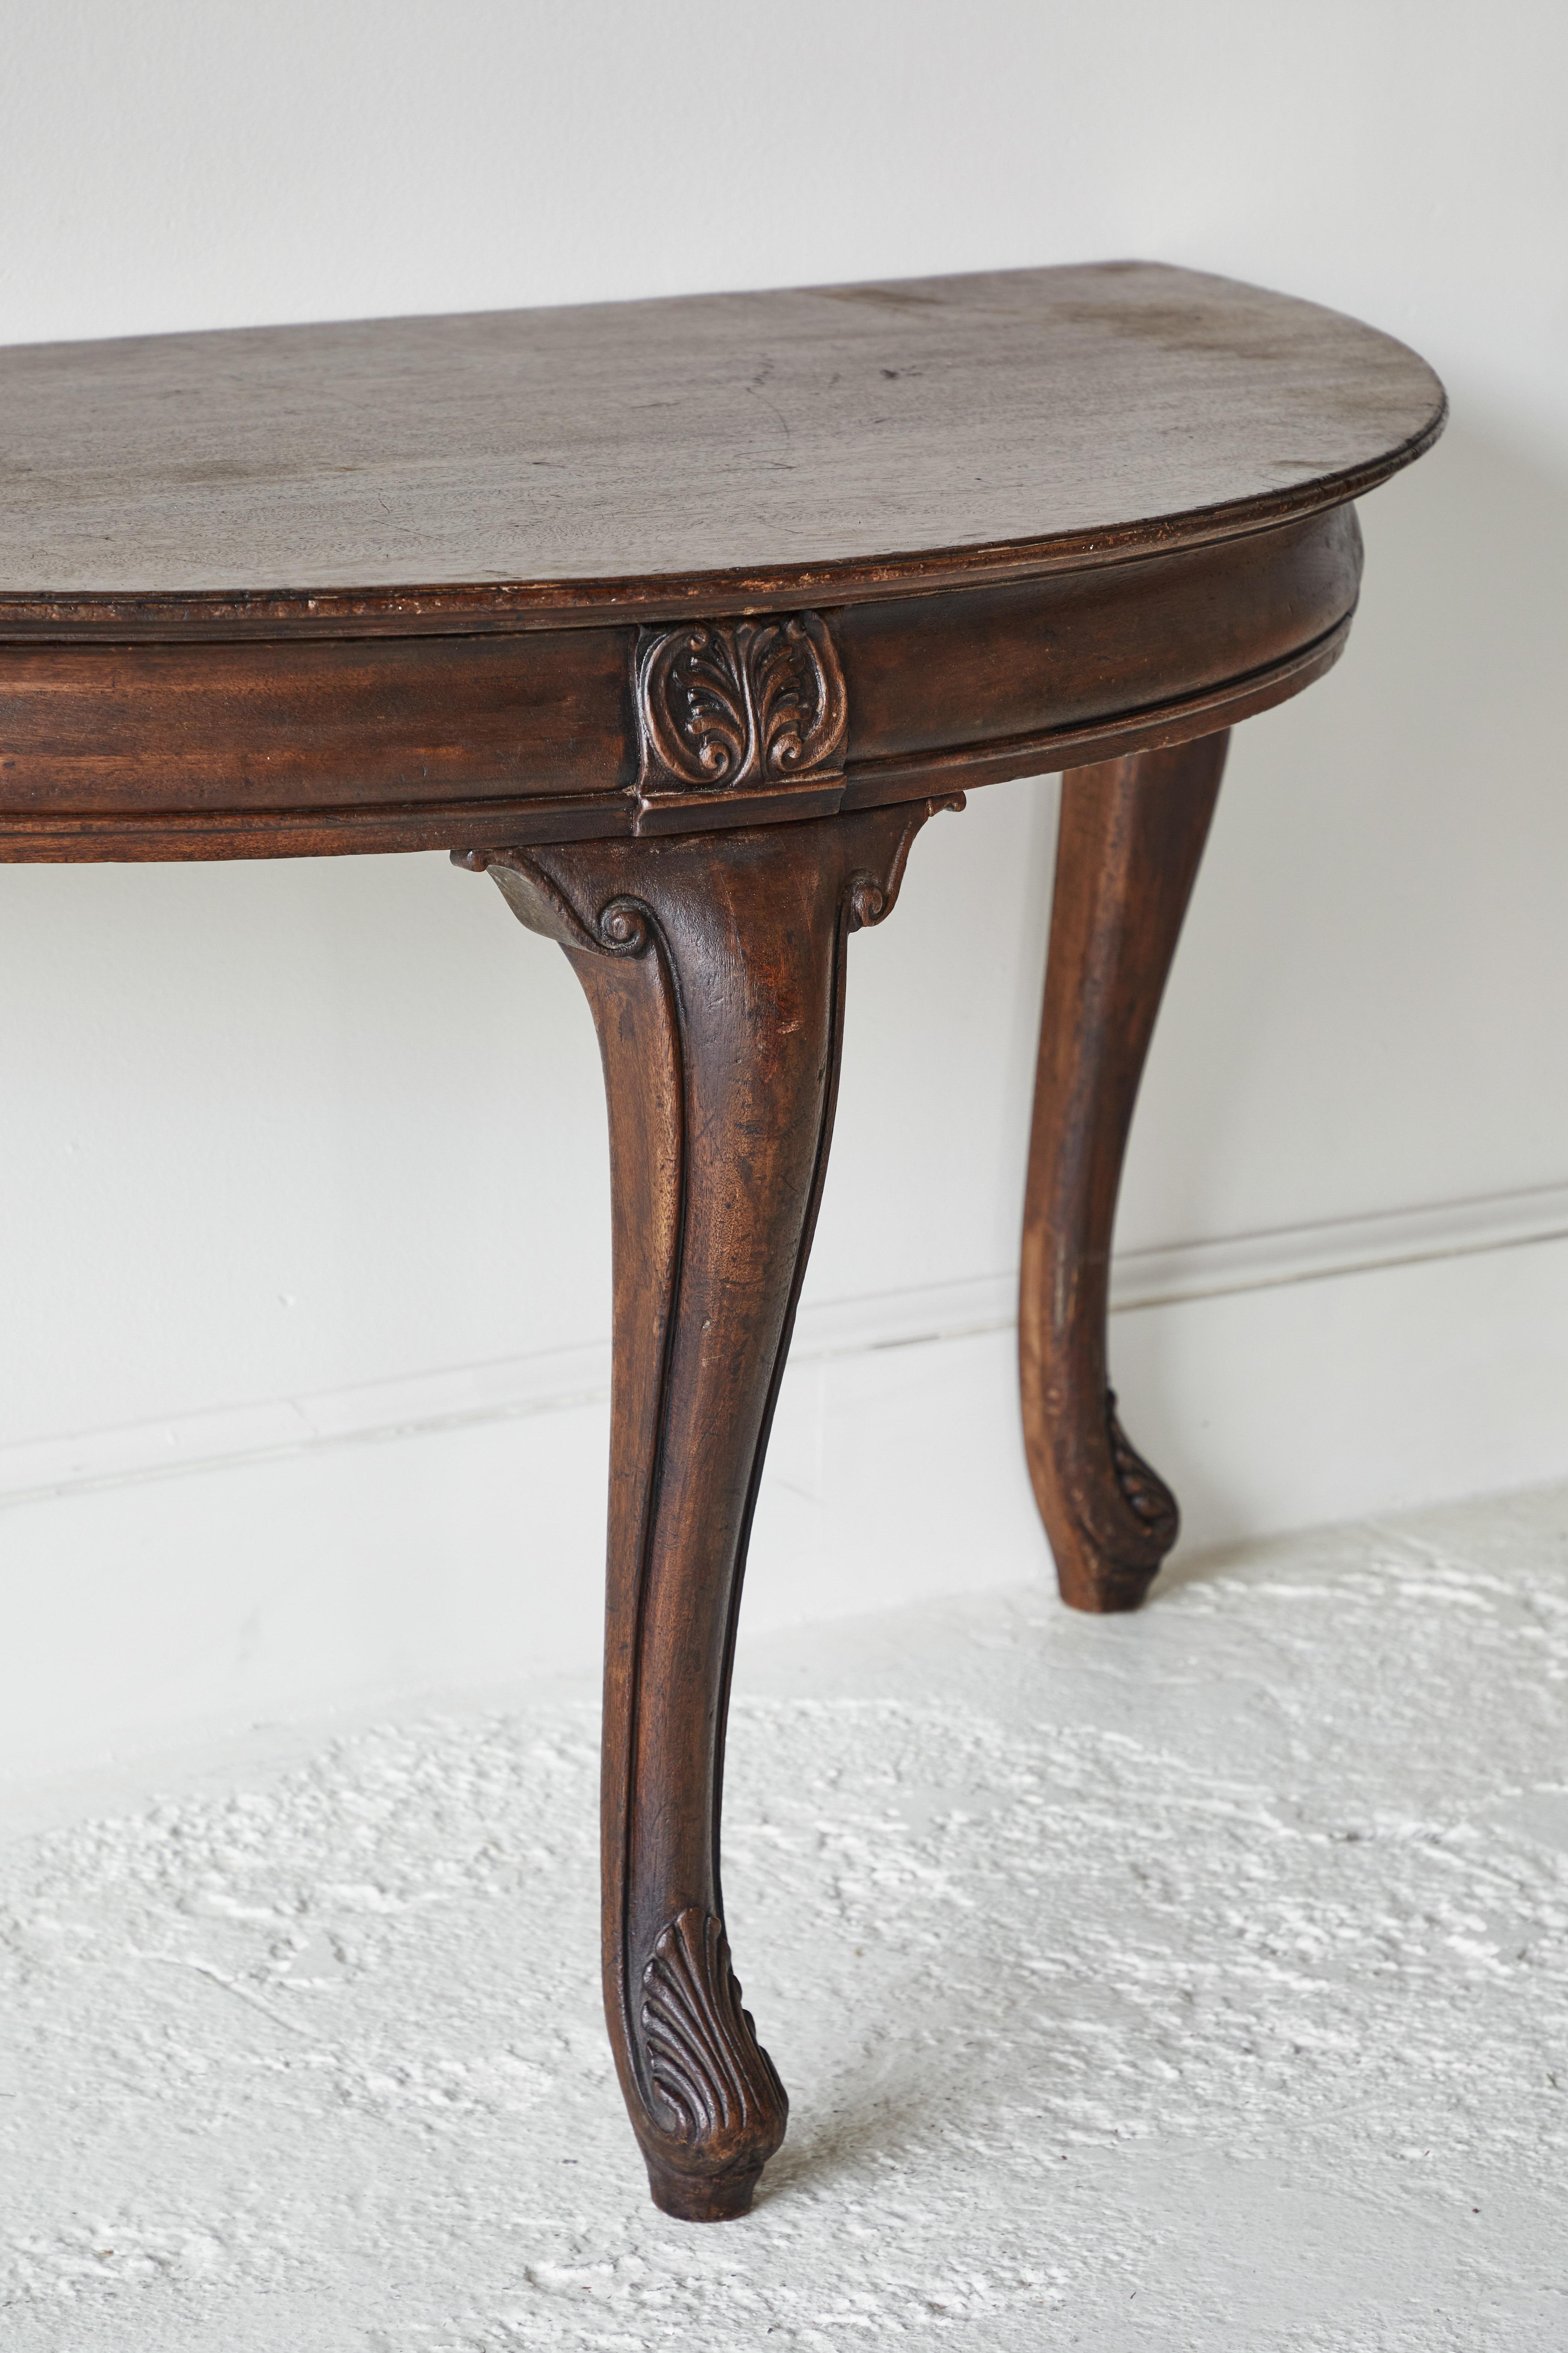 Early American Three Demilune Table 1